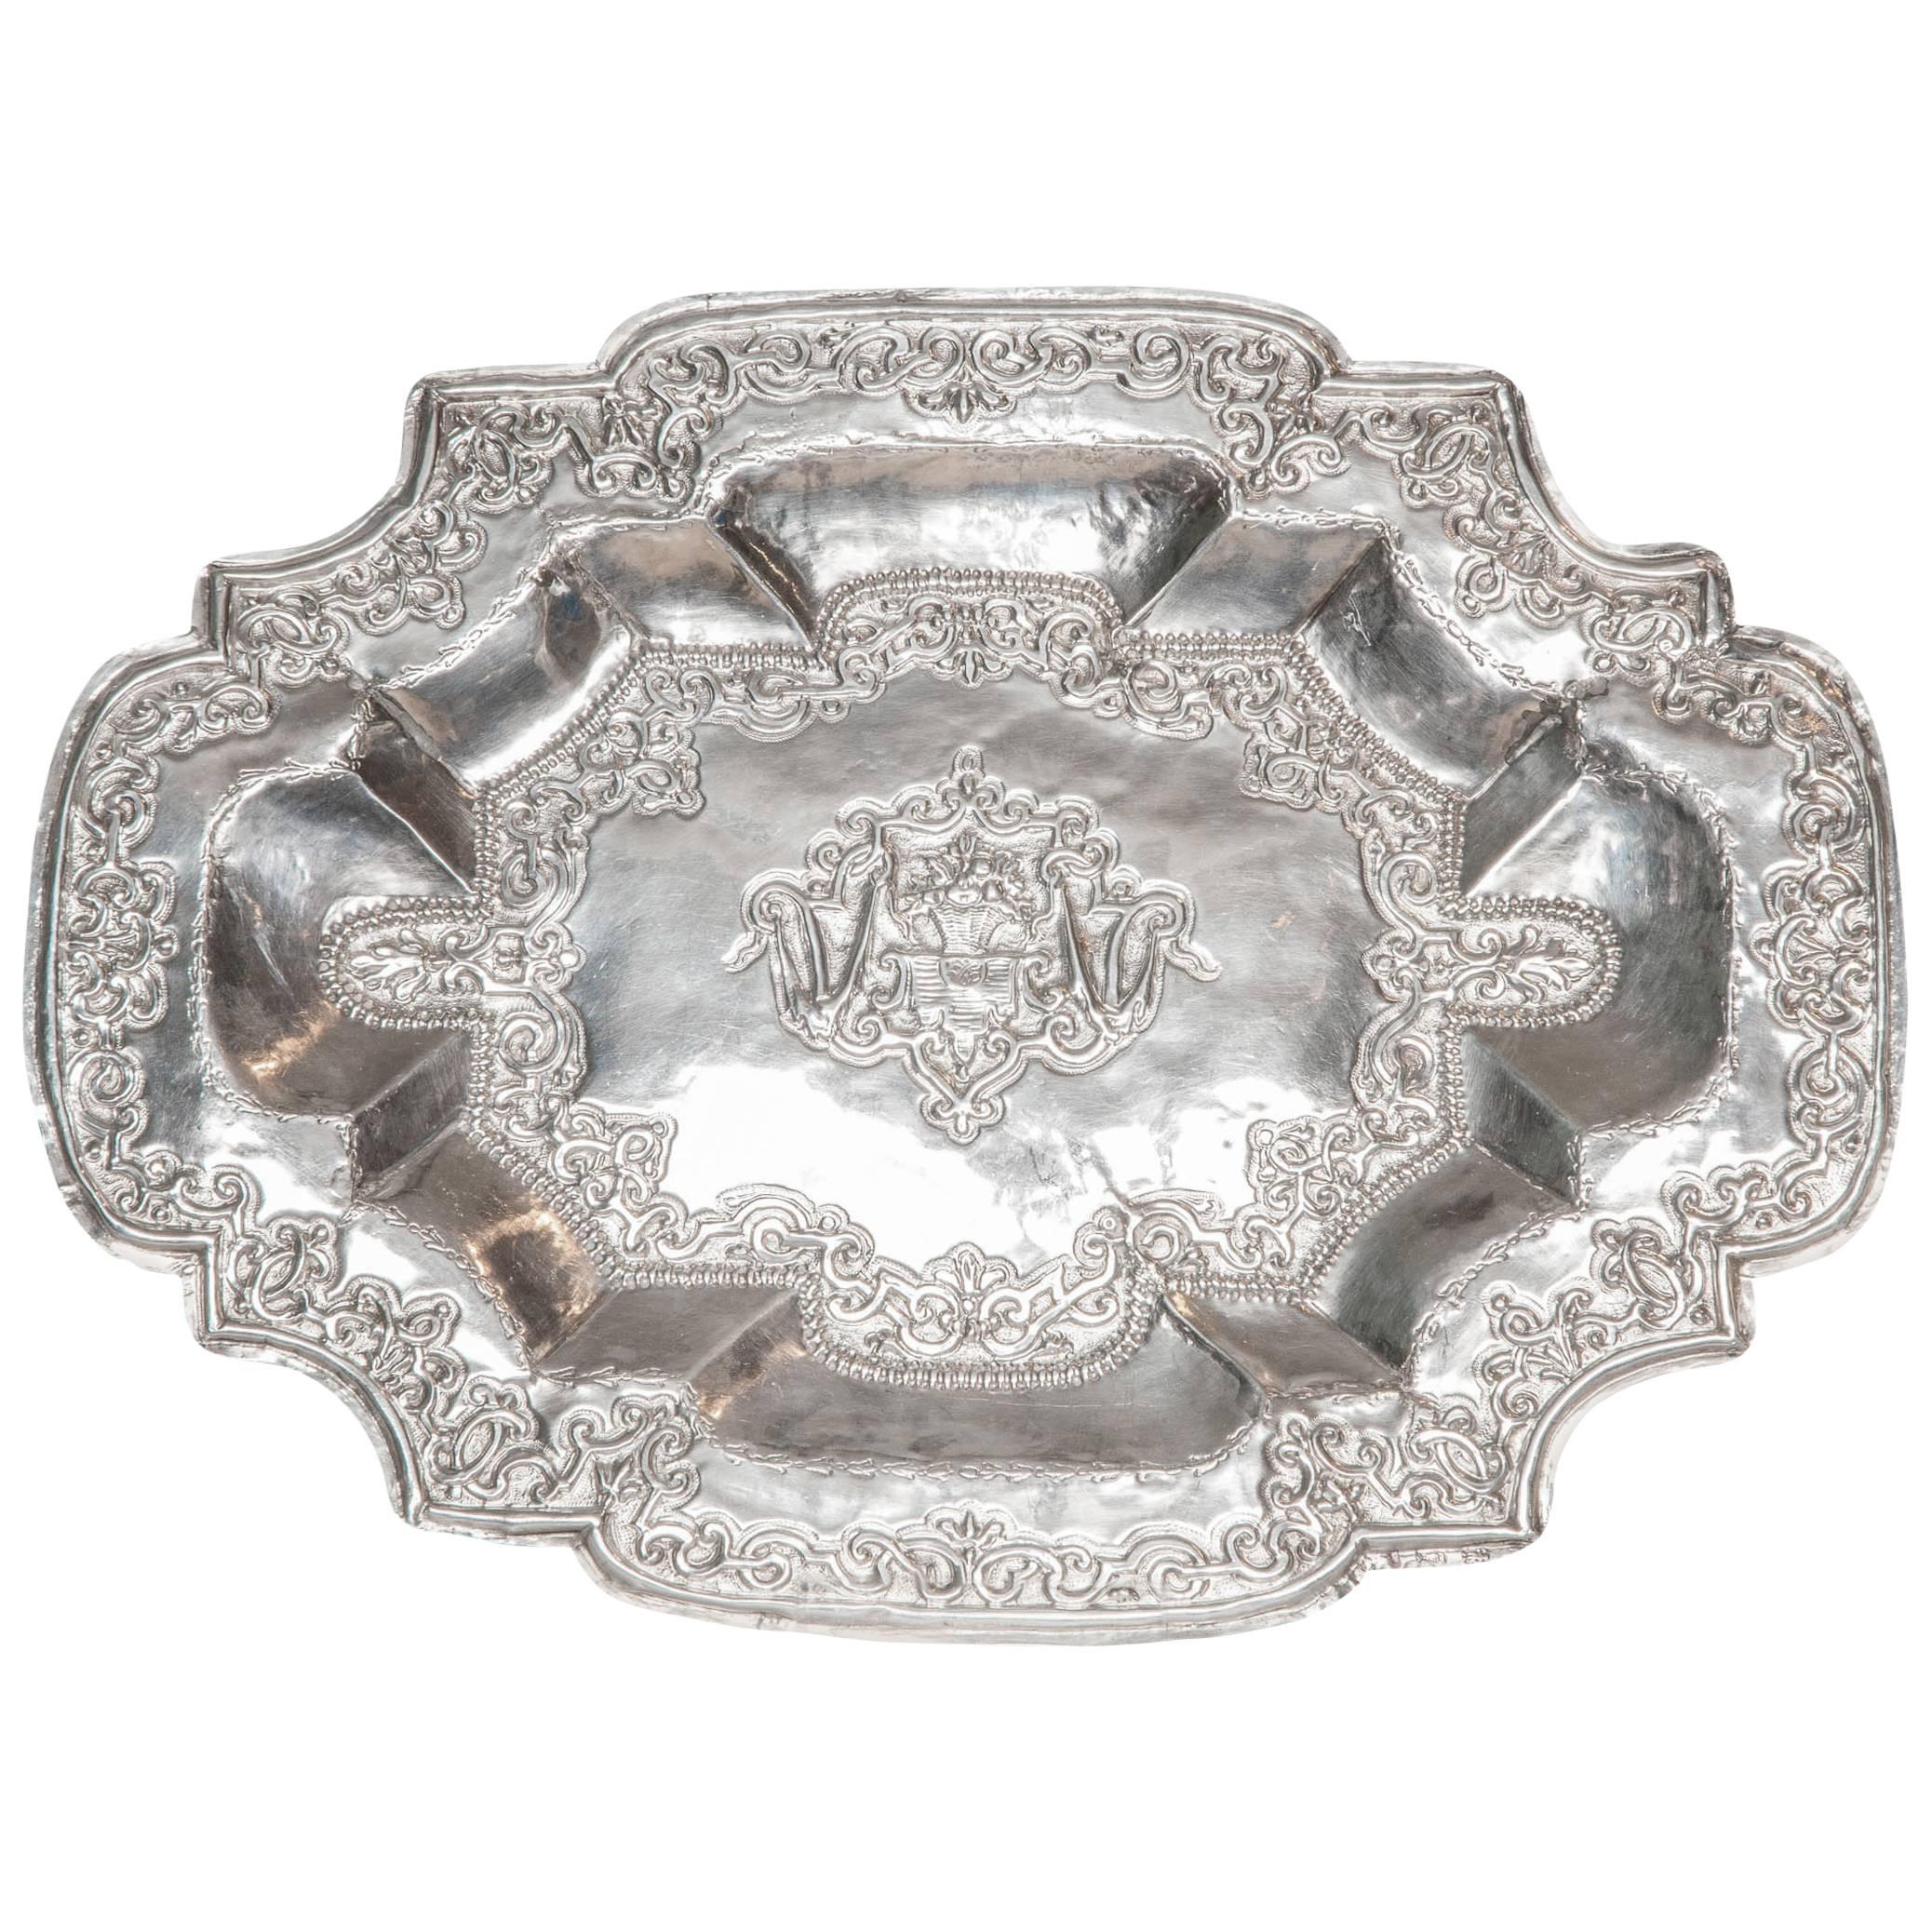 Mid-17th Century Dutch Silver Repousse' Shaped Glove Tray